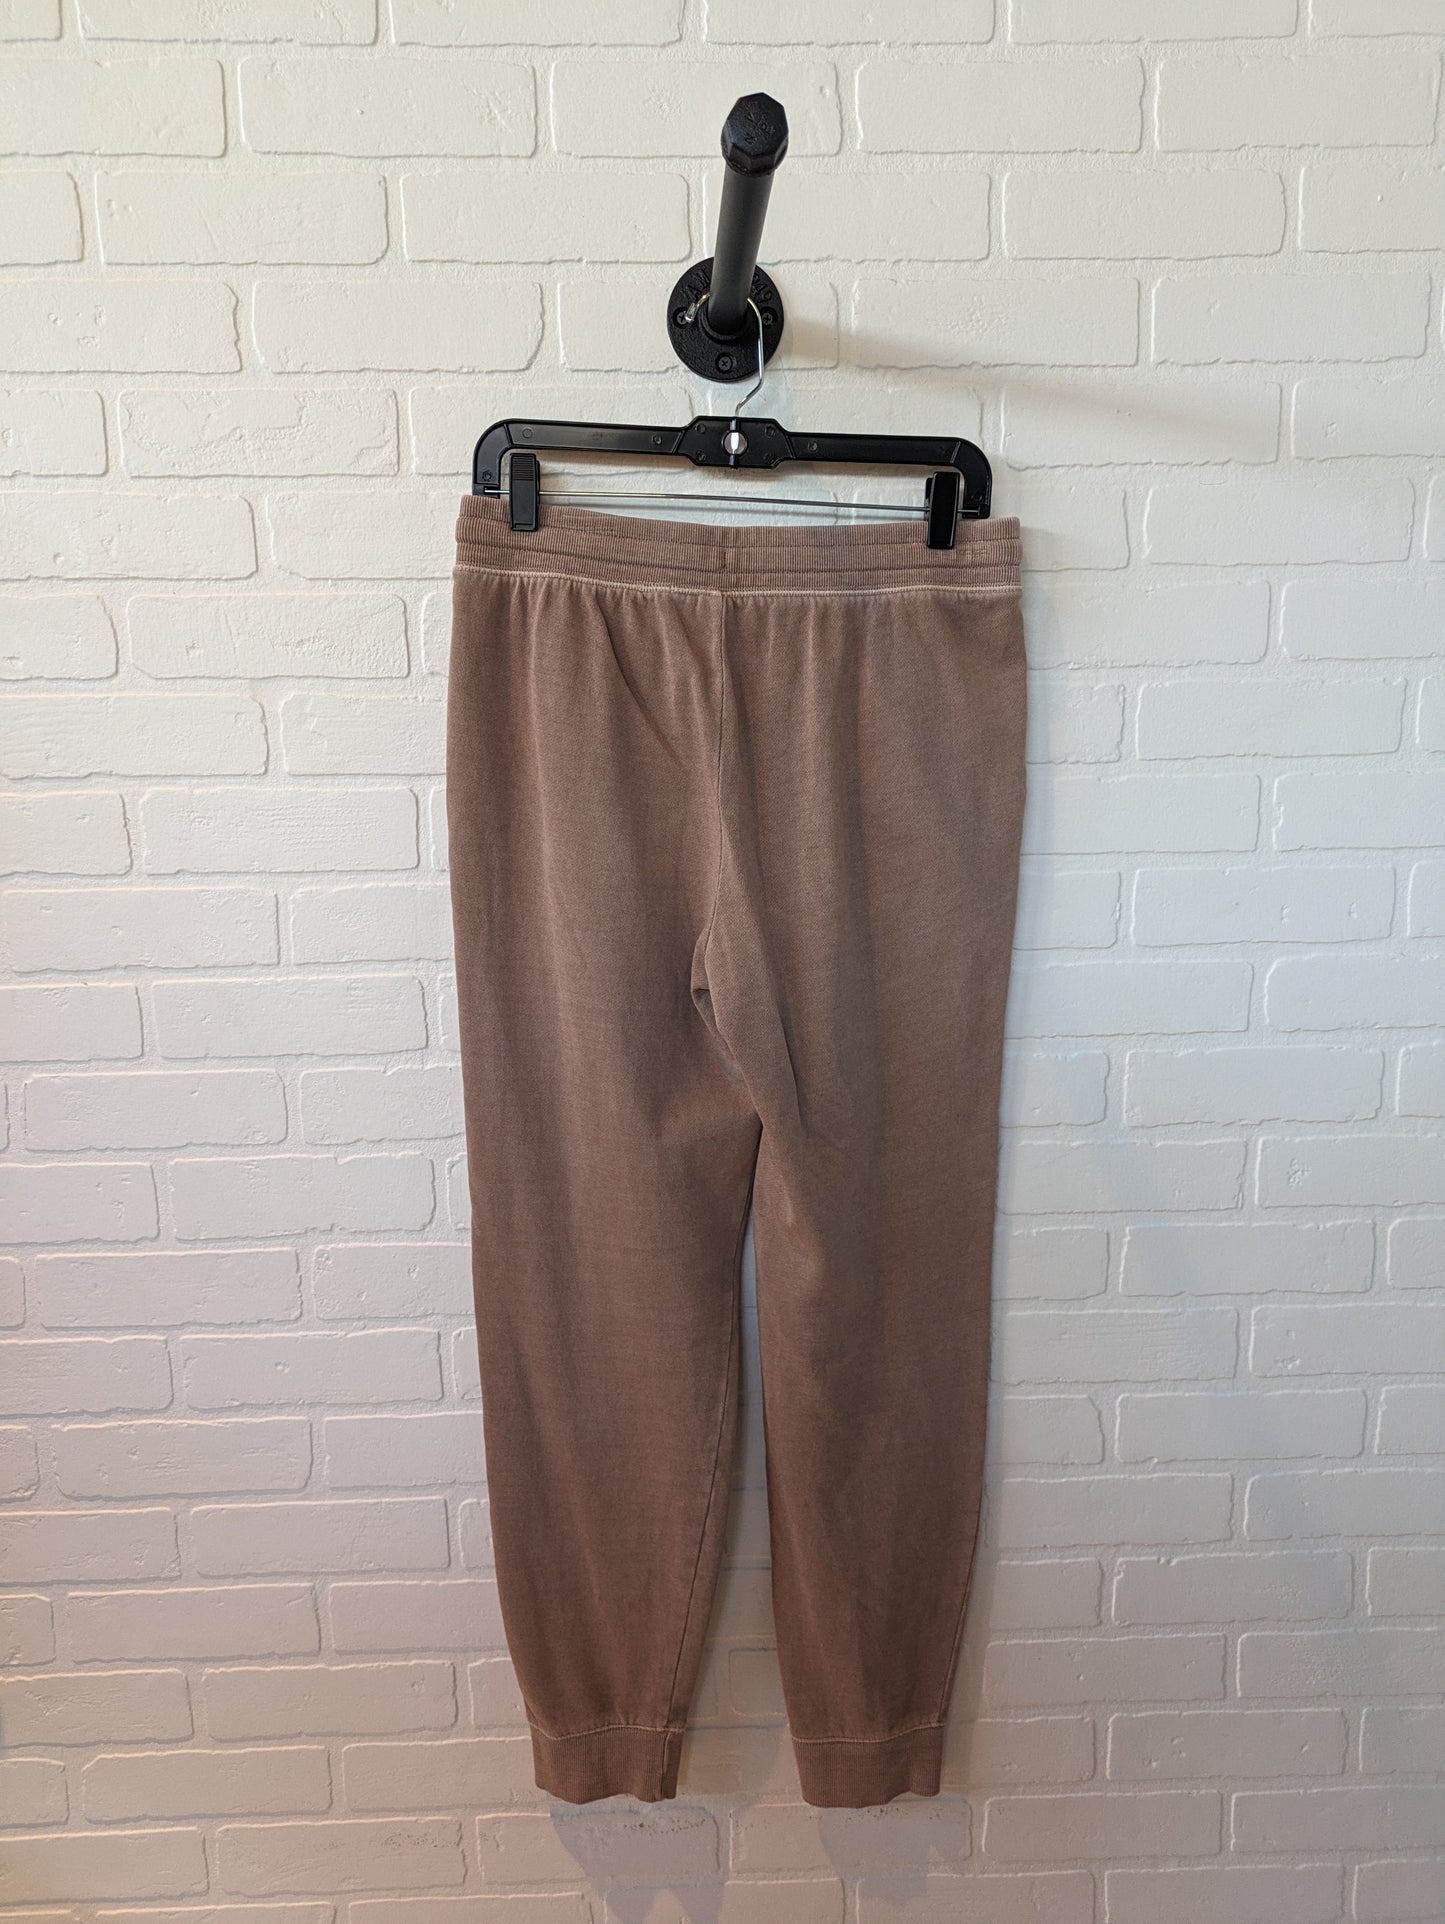 Athletic Pants By Old Navy  Size: 4